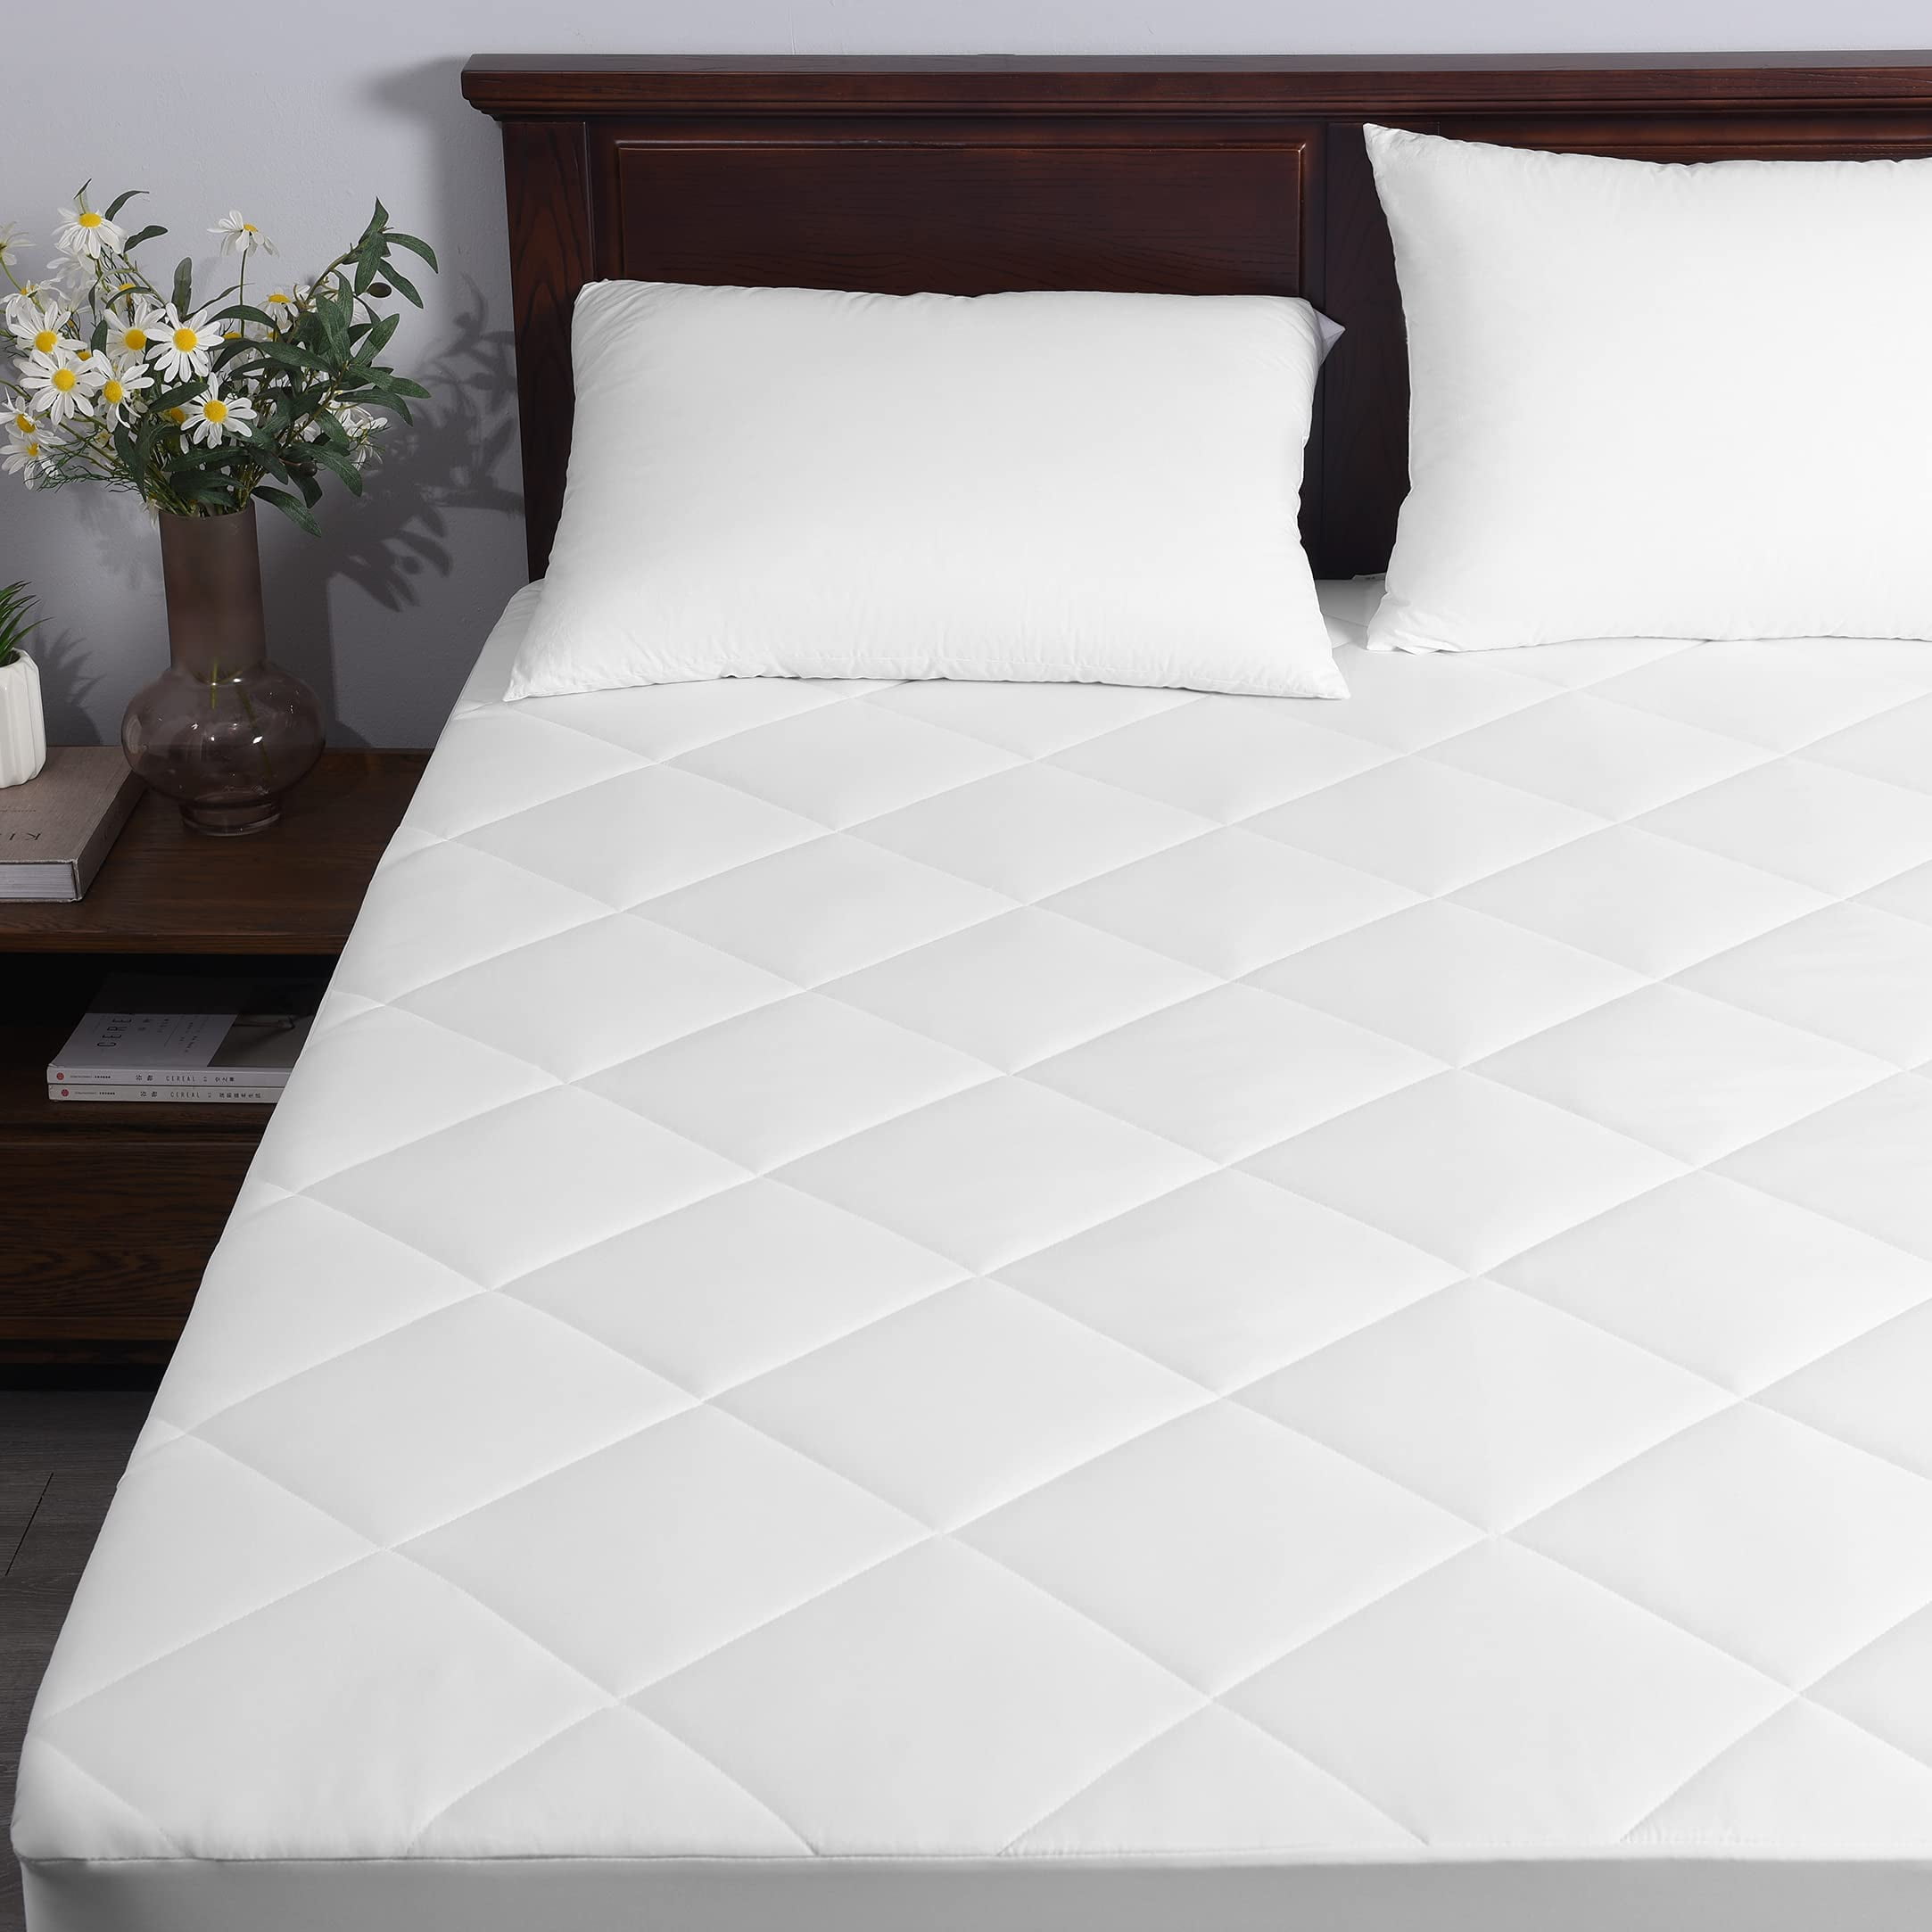 Hypoallergenic Quilted Fitted Down Alternative Waterproof Mattress Pad Cover 